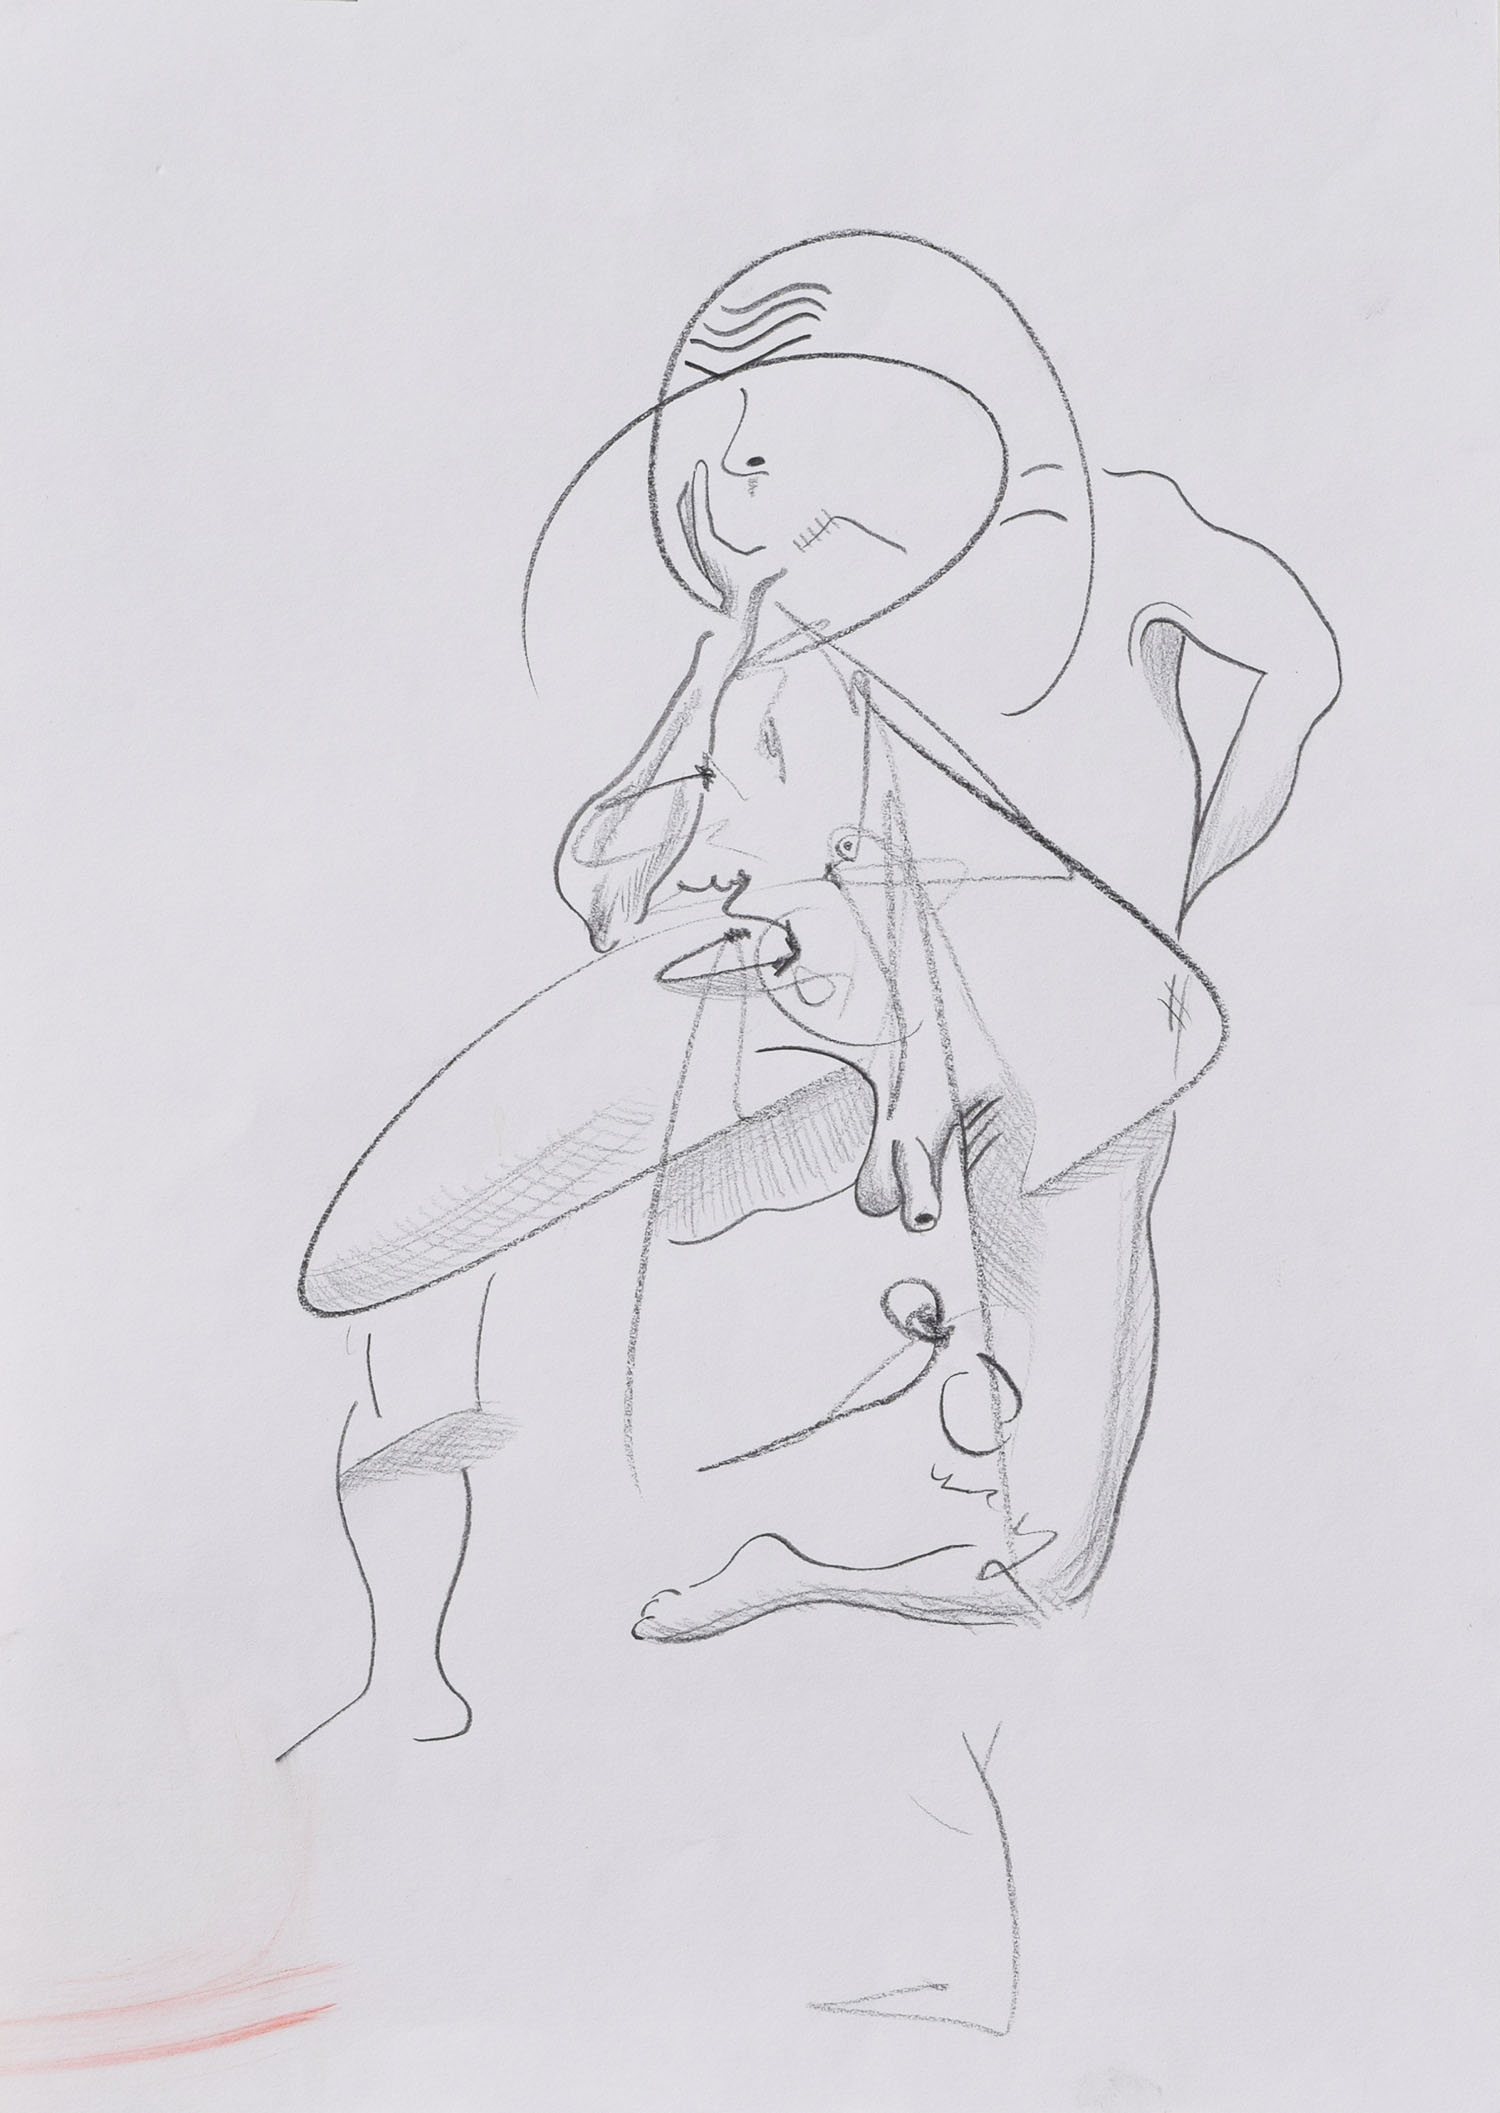 drawing, line drawing, life drawing, contemporary drawing, contemporary art, figurative art, figurative drawing, spontaneous drawing, laurence jansen, laurence jansen artist, contemporary painter, contemporary artist,